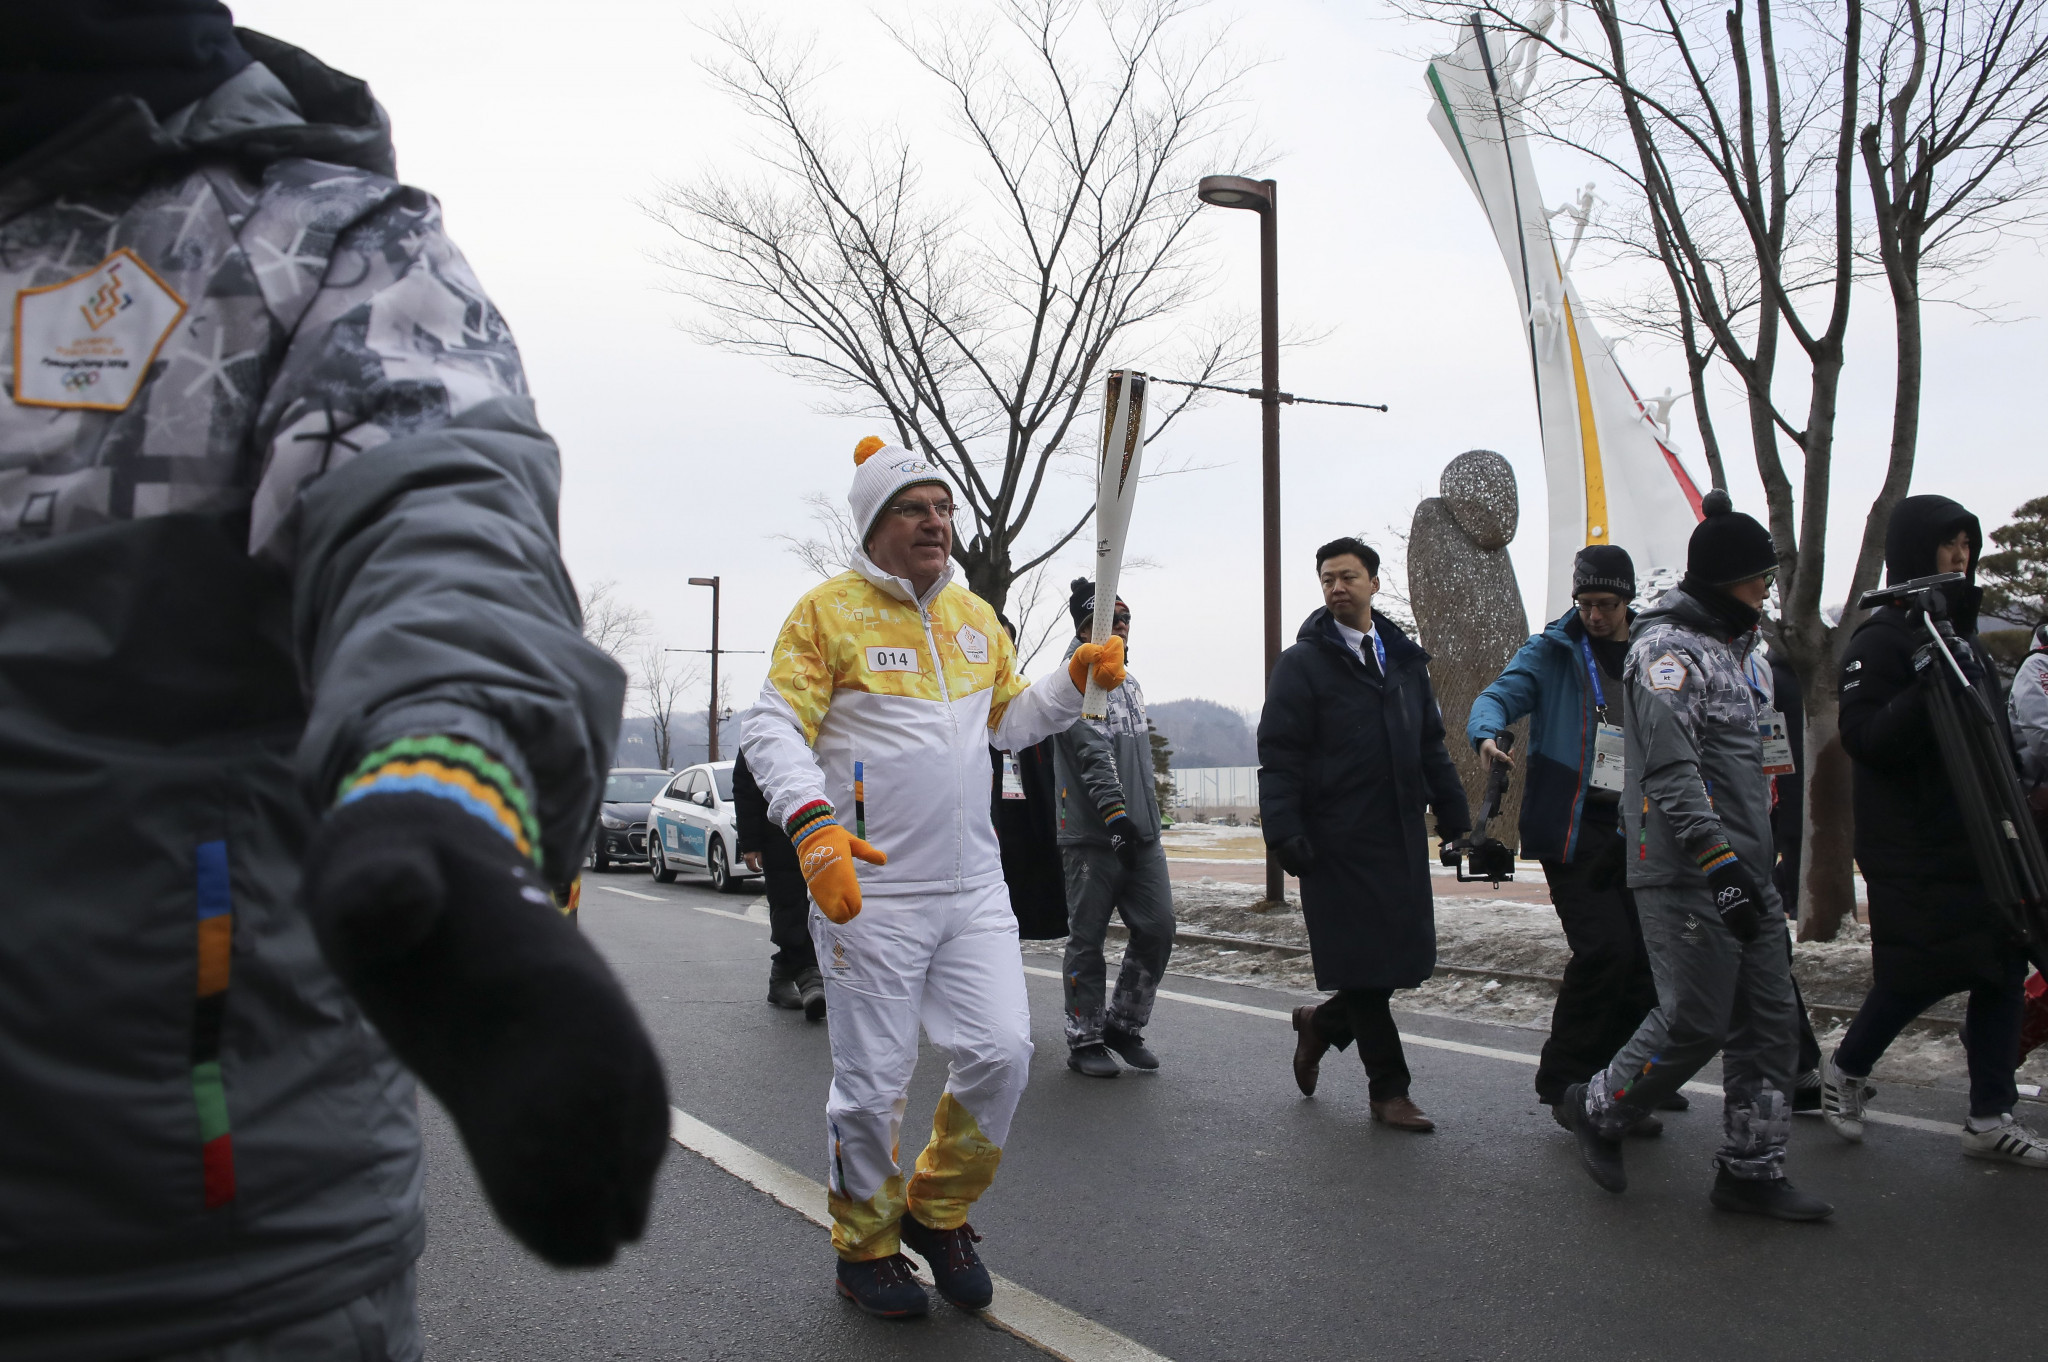 IOC President Thomas Bach, here carrying the Pyeongchang 2018 Torch, will not do so at Tokyo 2020 ©Getty Images